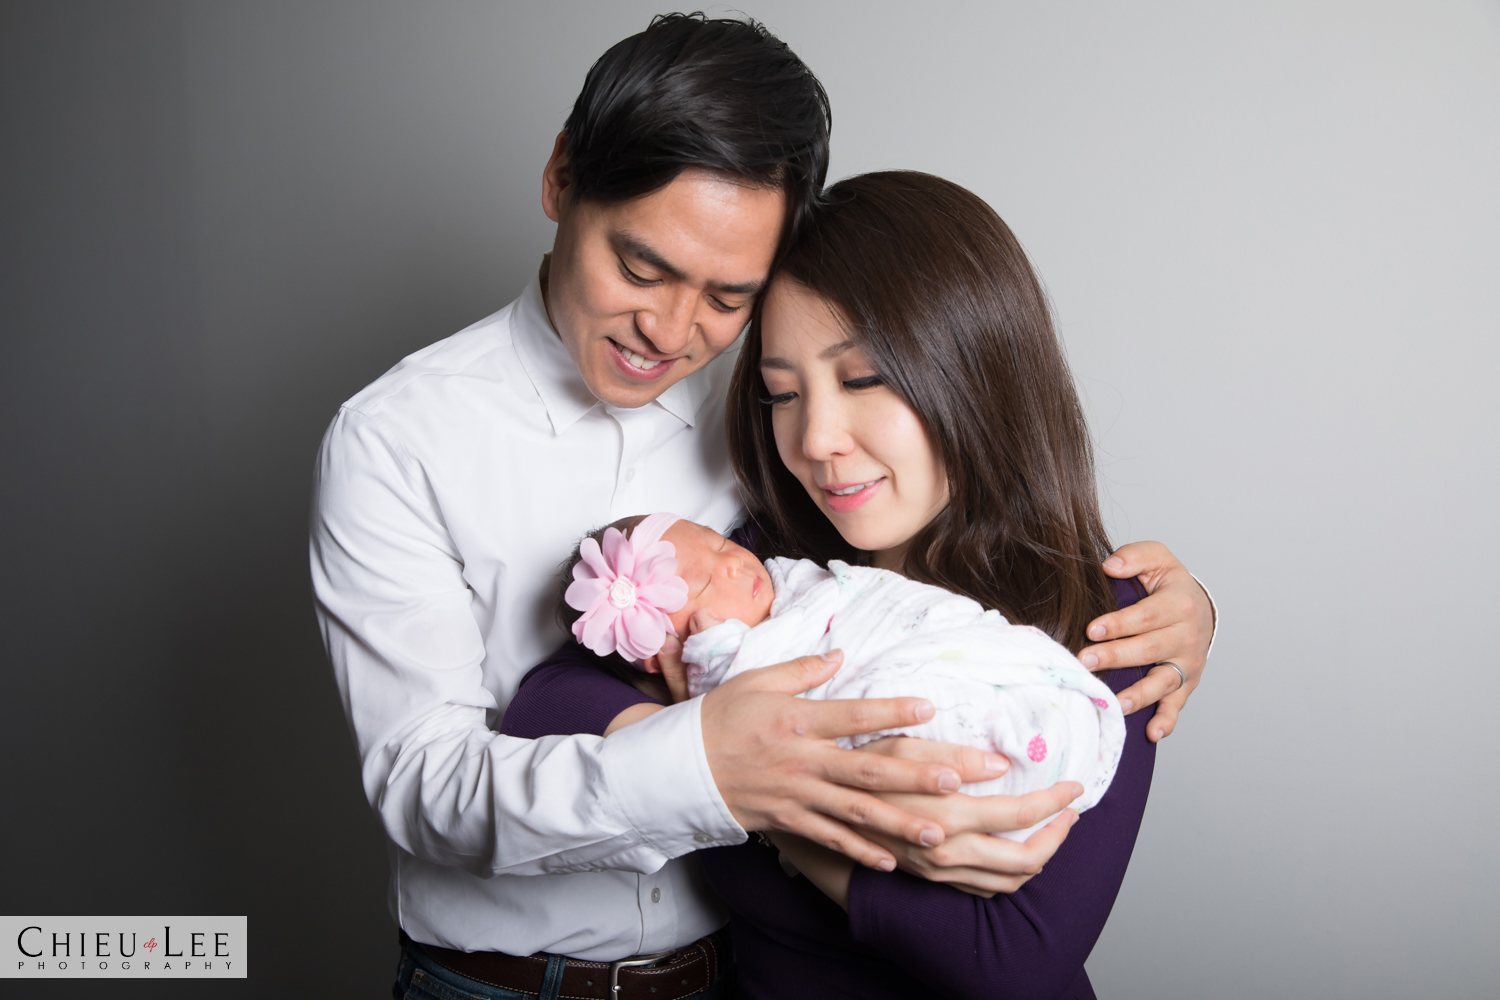 Half body parents mother mom father dad family embrace holding cuddling newborn baby girl sleeping eyes closed pink flower headband and white wrap white sweater light blue collar purple blouse gray gradient background